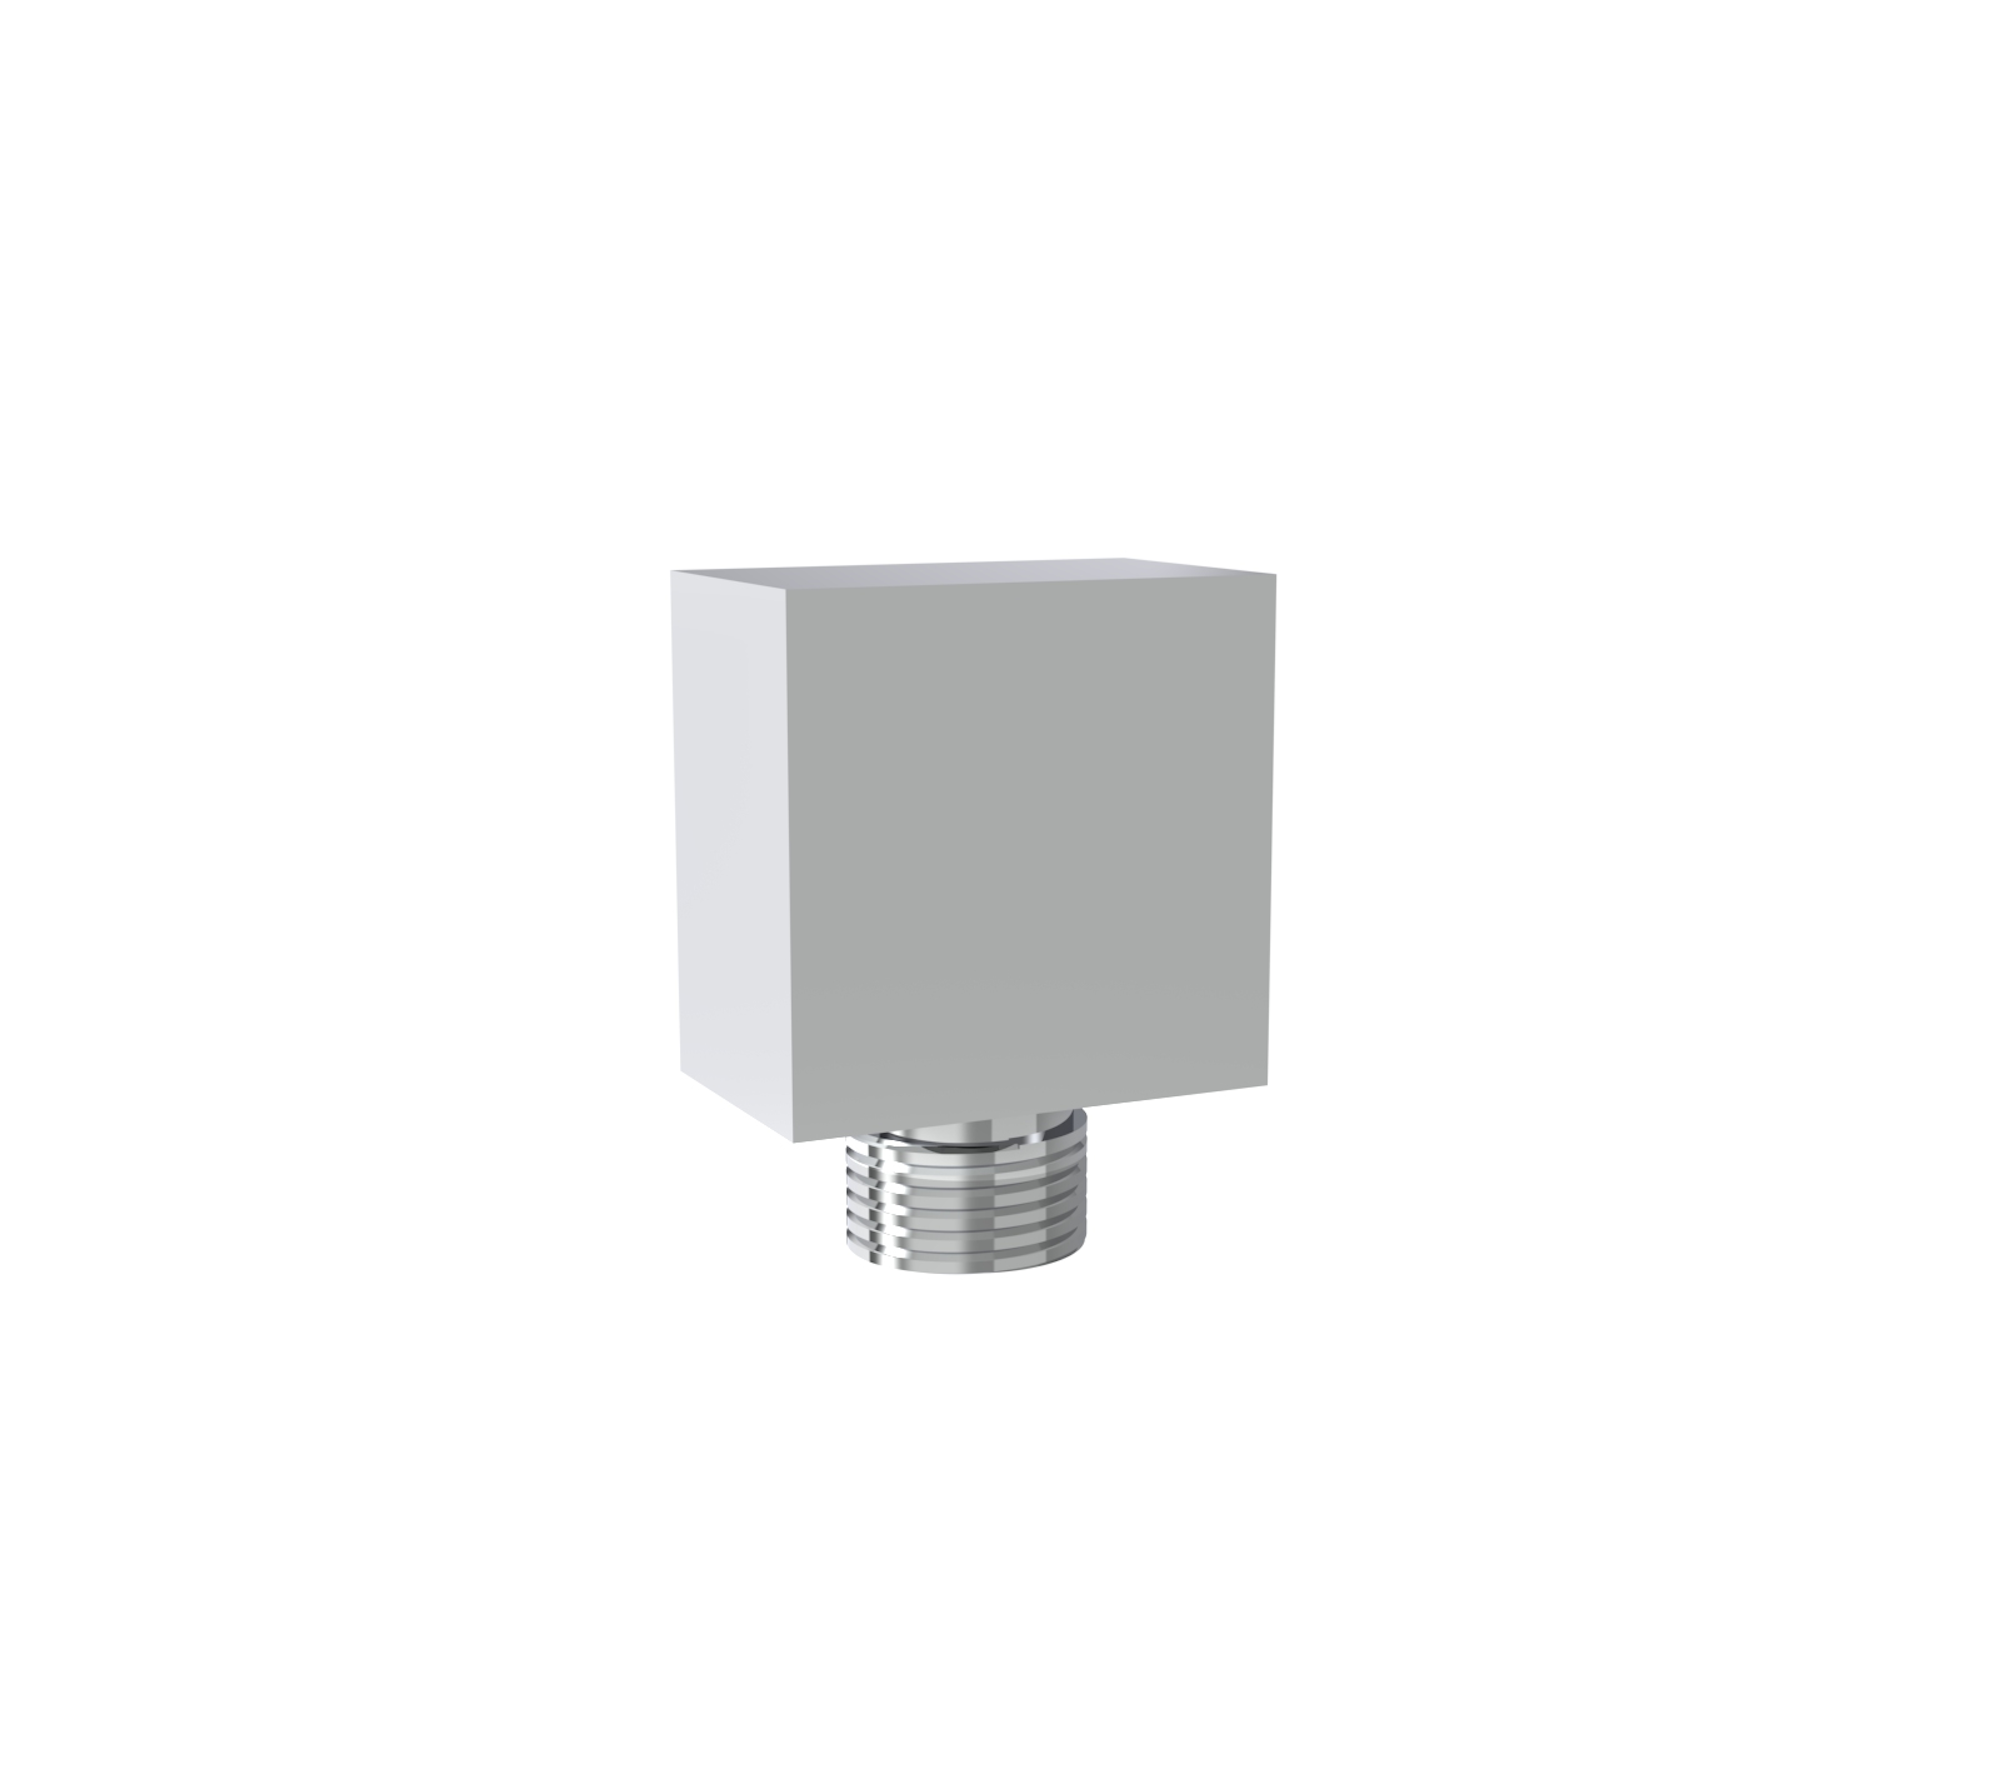 TOOGA square shower outlet elbow - Chrome